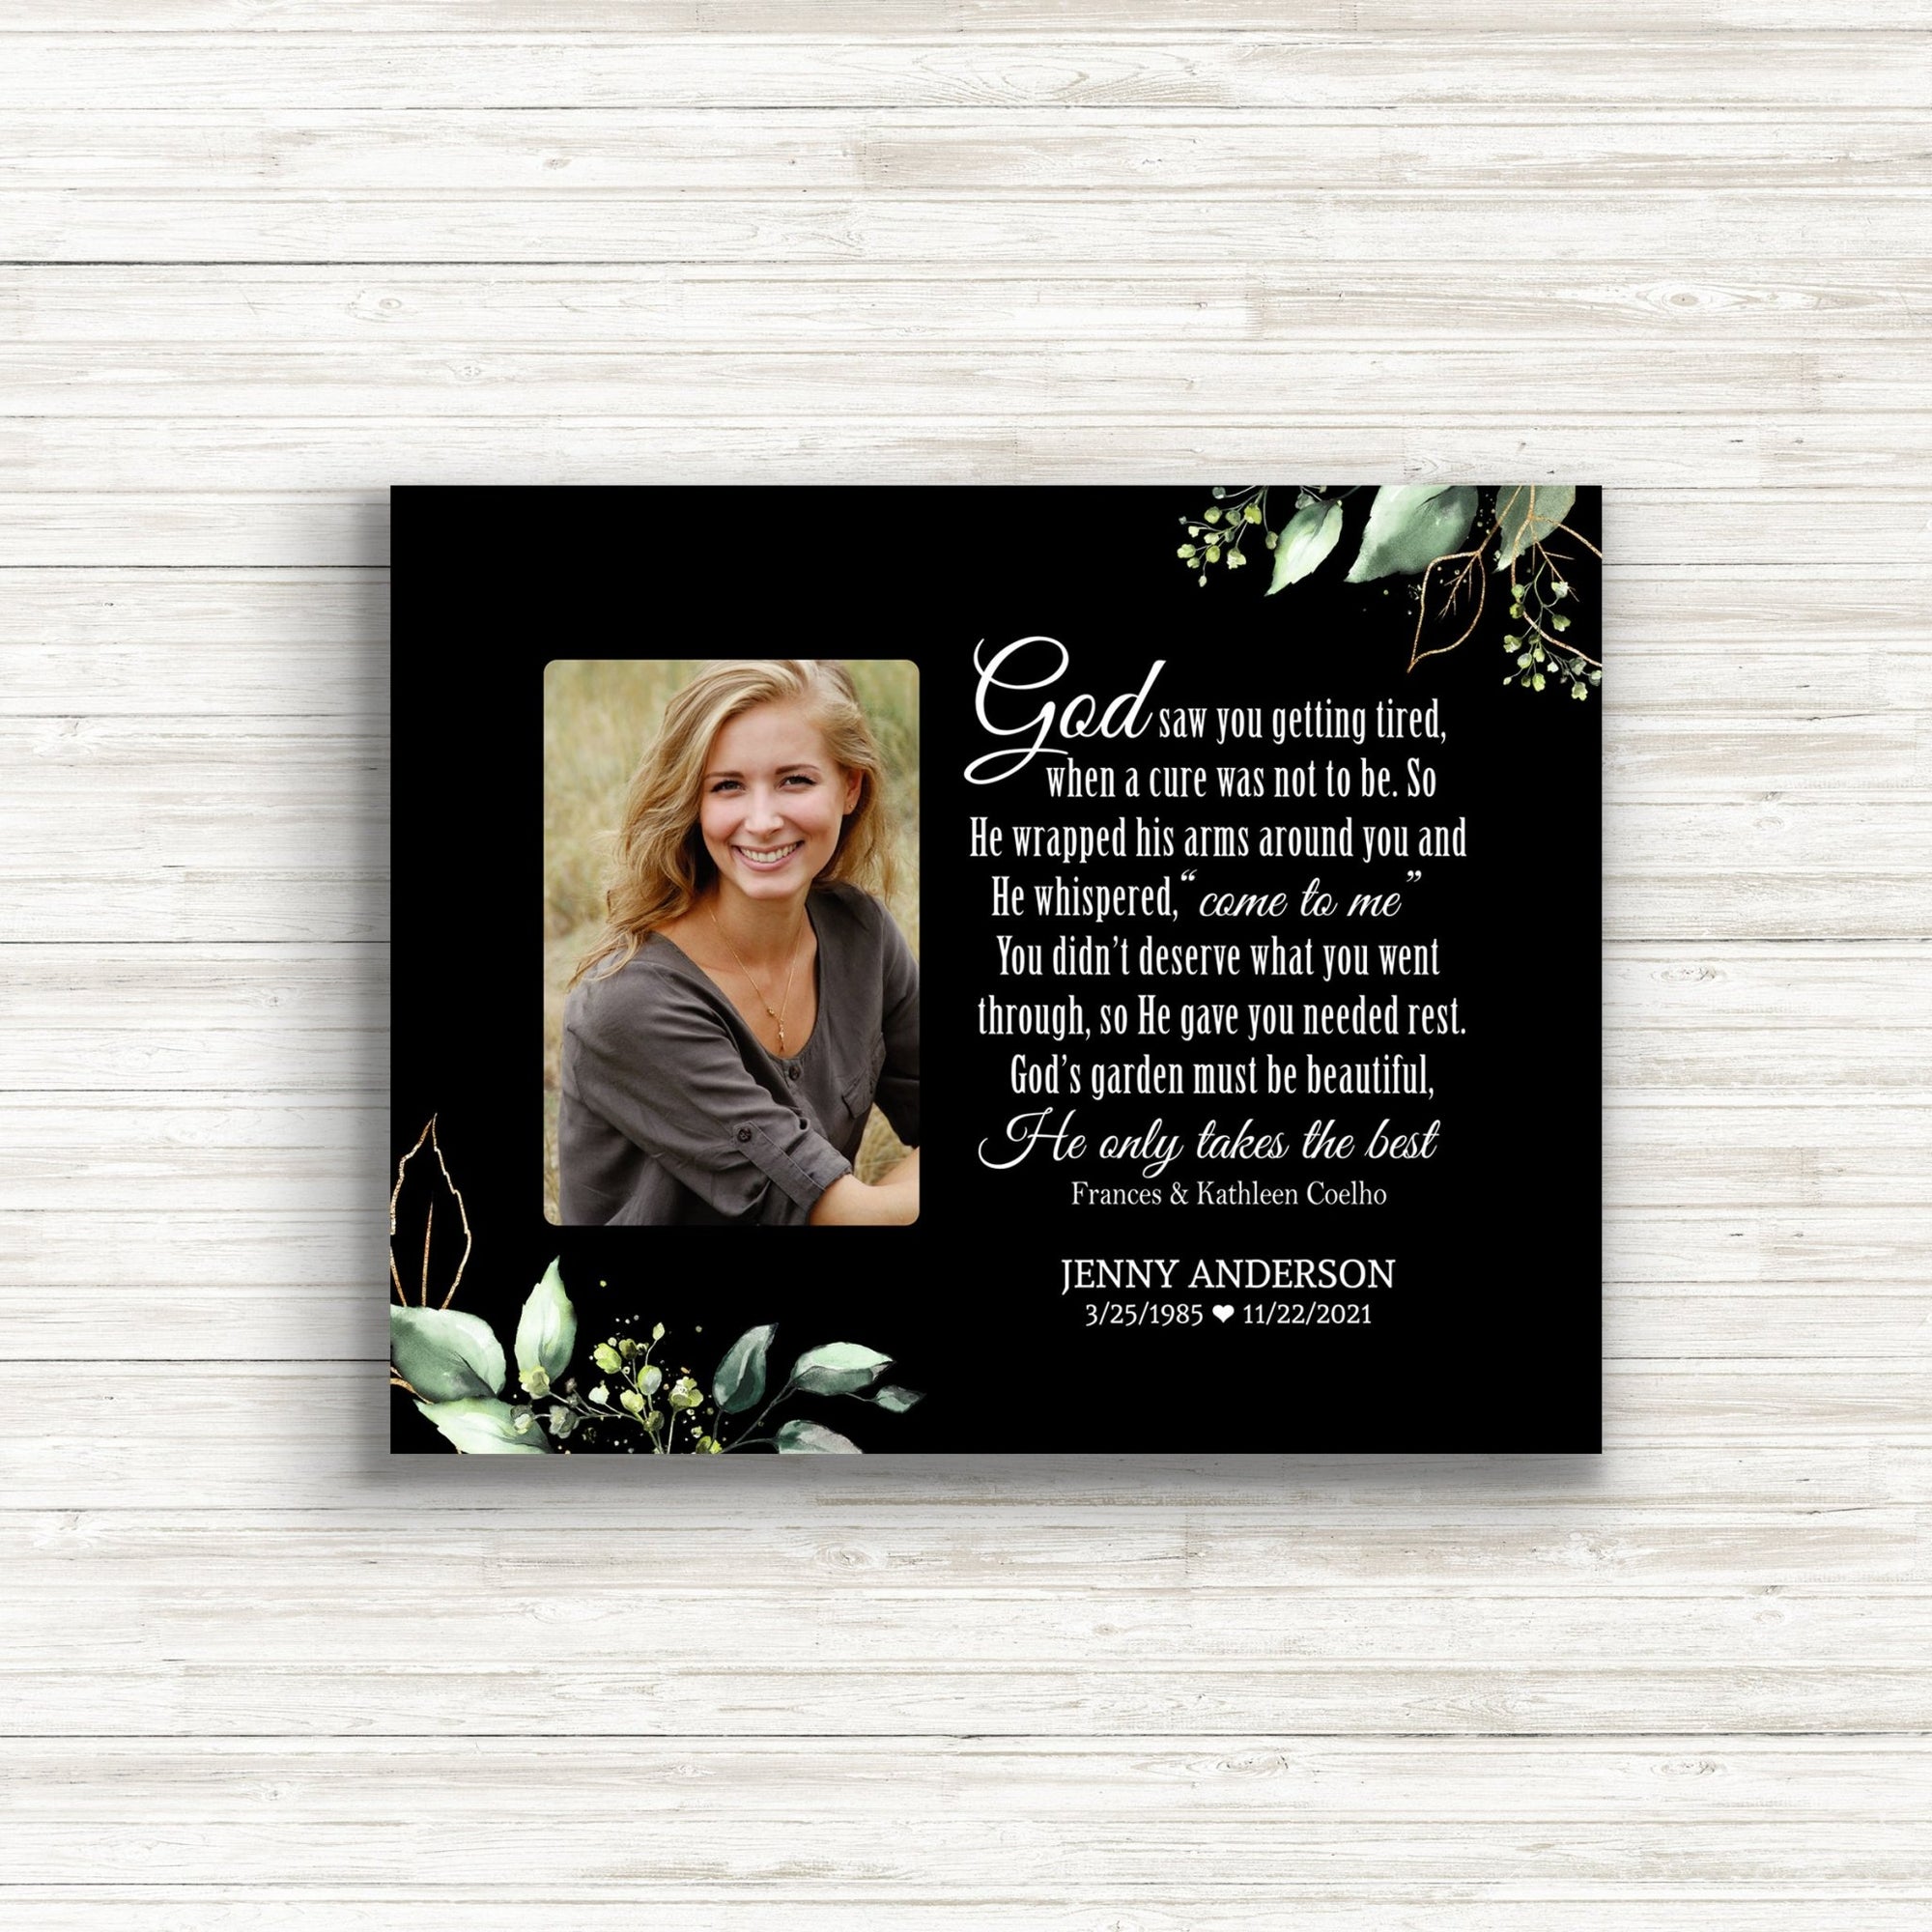 Personalized Human Memorial Black Photo & Inspirational Verse Bereavement Wall Décor & Sympathy Gift Ideas - God Saw You - LifeSong Milestones